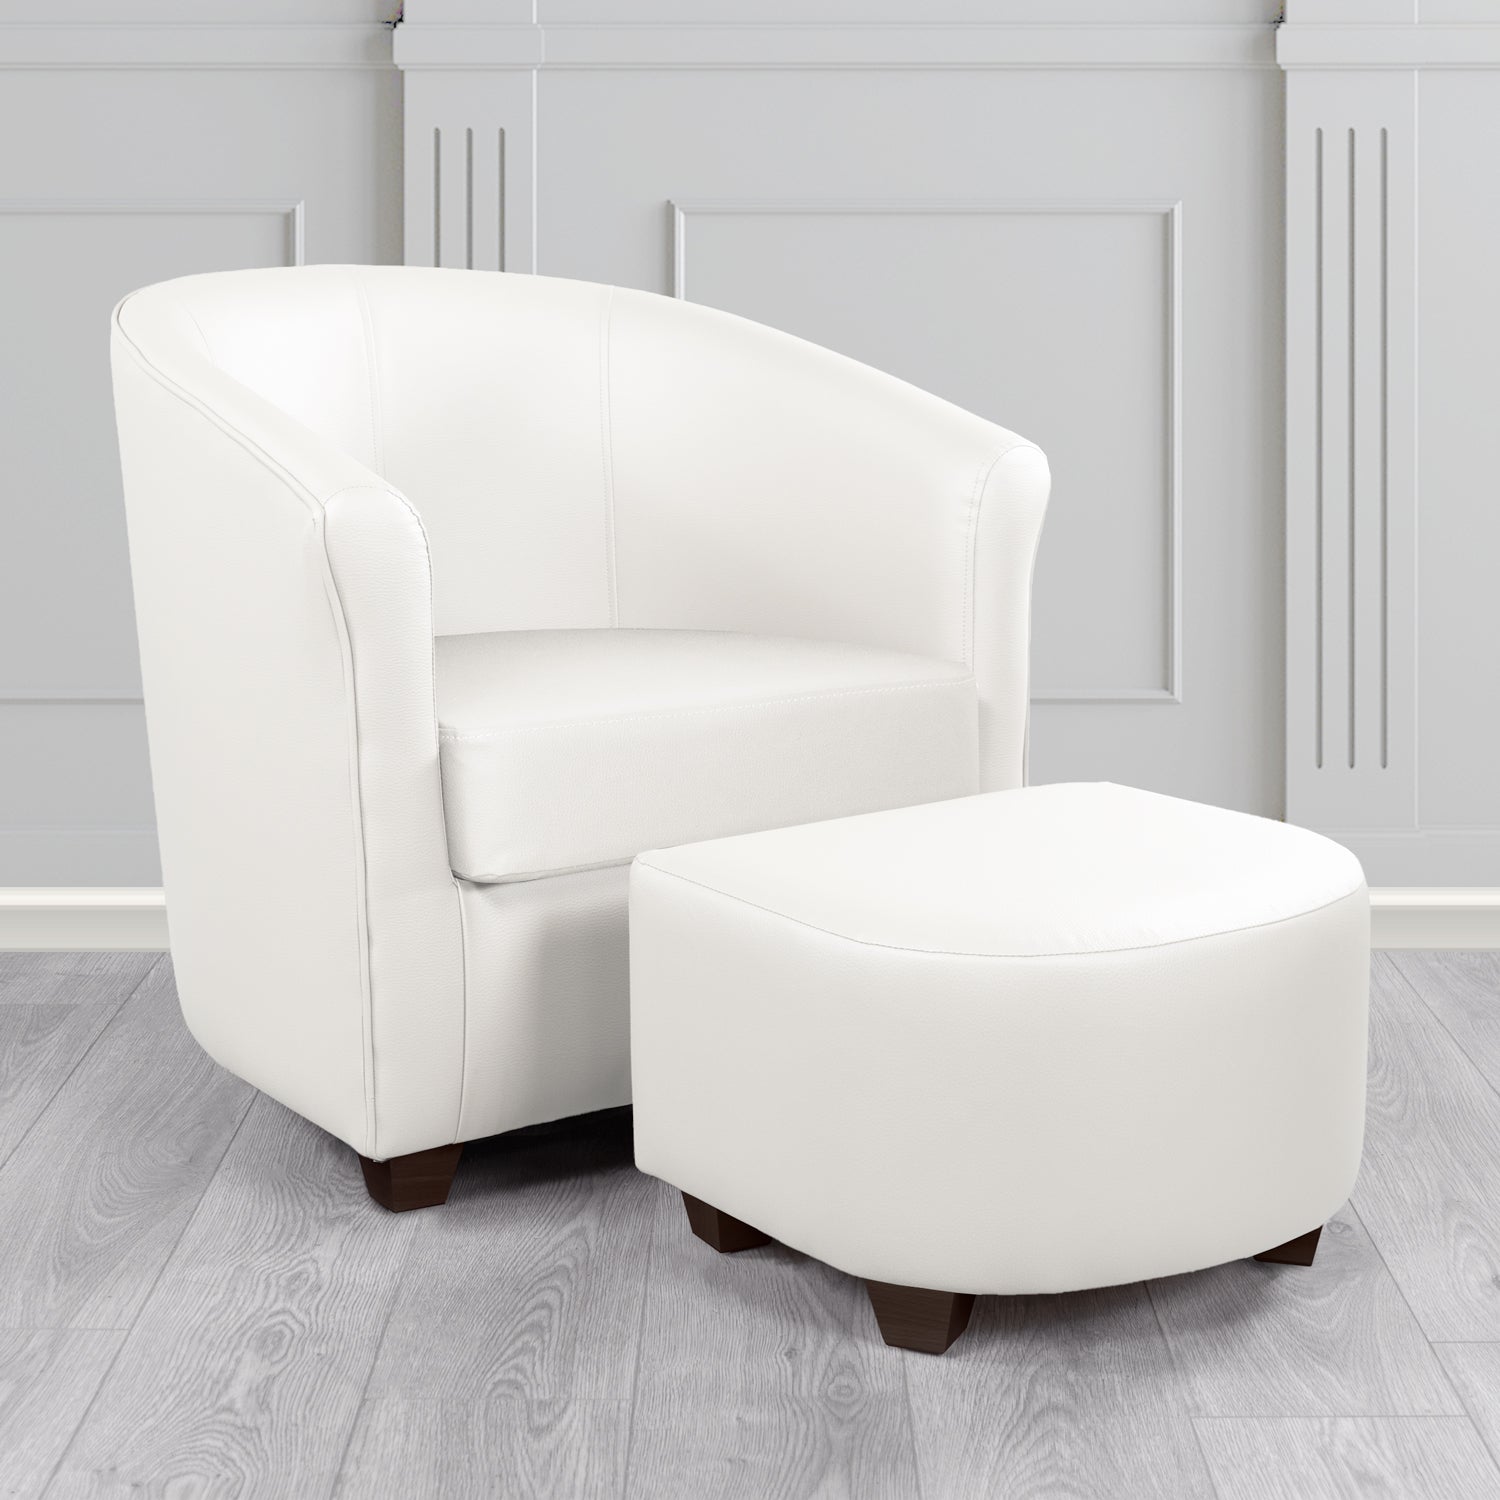 Cannes Tub Chair with Footstool Set in Madrid White Faux Leather - The Tub Chair Shop